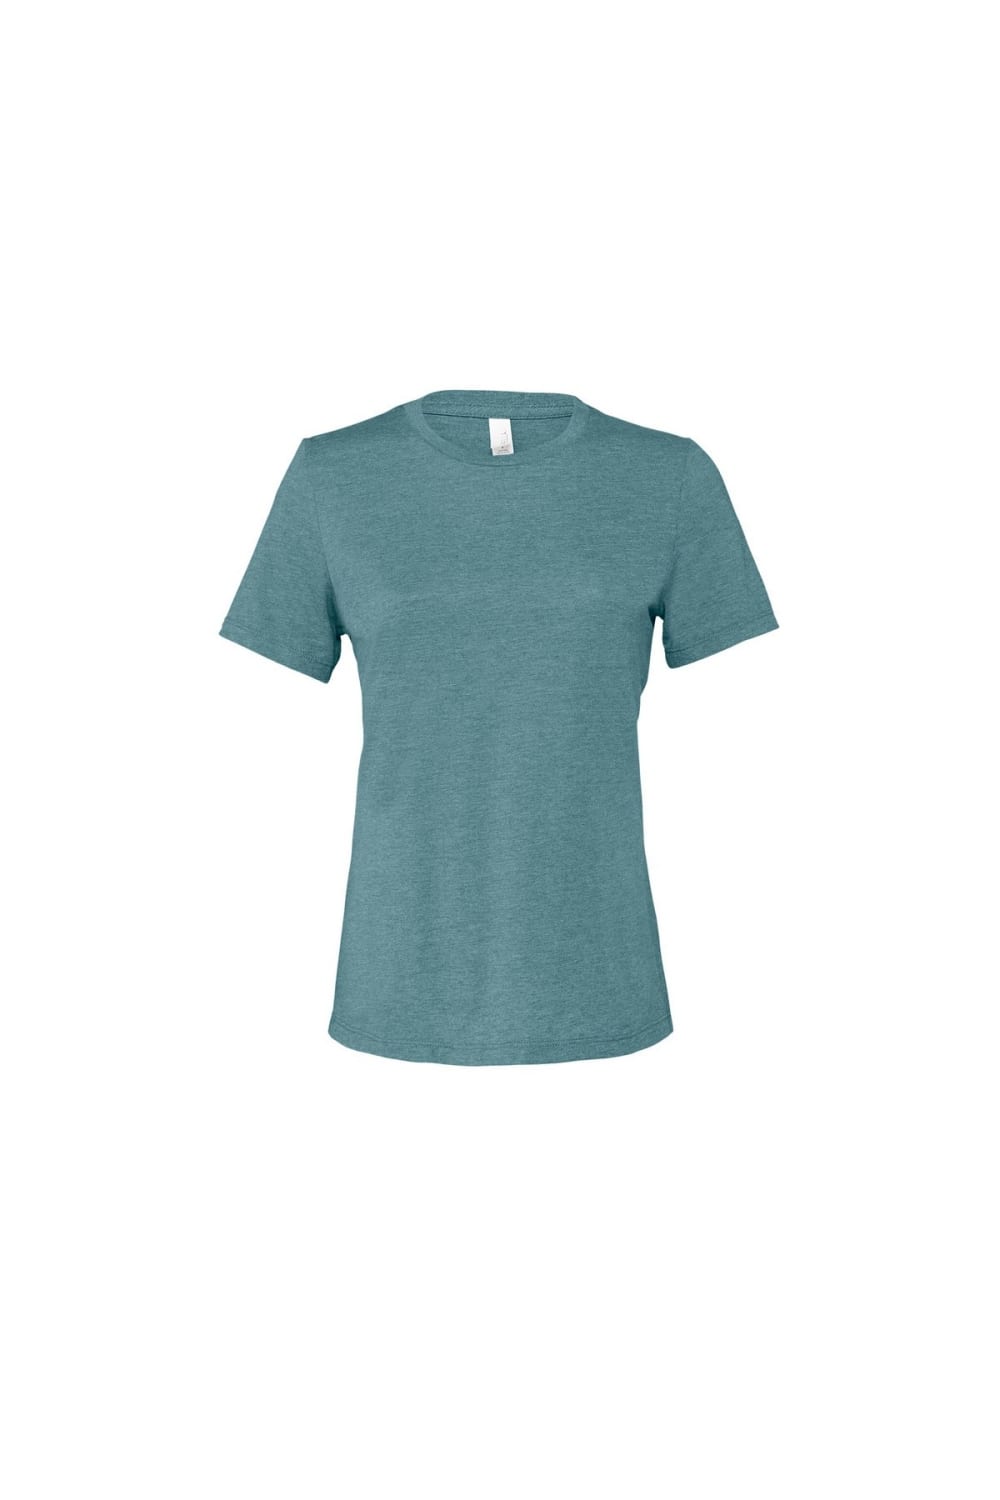 Bella + Canvas Womens/Ladies Relaxed T-Shirt (Deep Teal Heather)